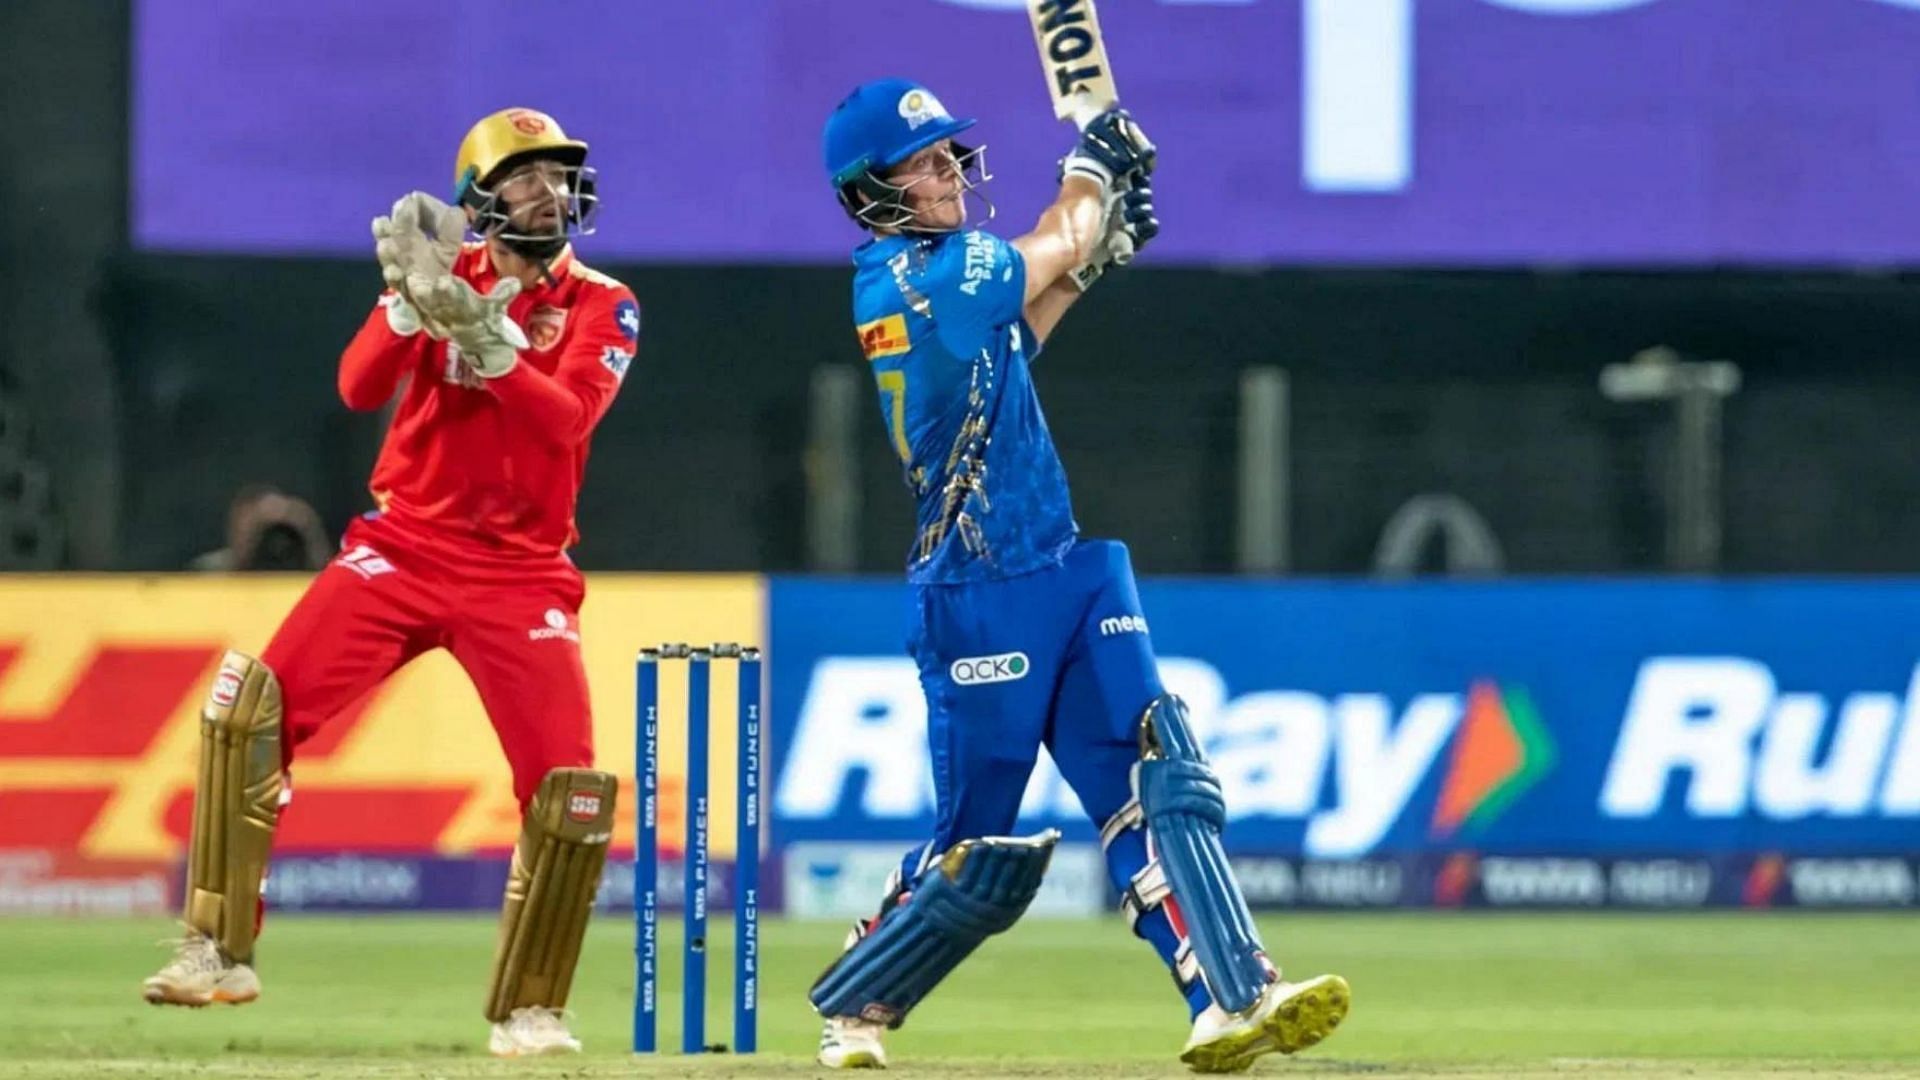 Dewald Brevis smashed Rahul Chahar for four sixes off four consecutive deliveries in IPL 2022. (P.C.:iplt20.com)